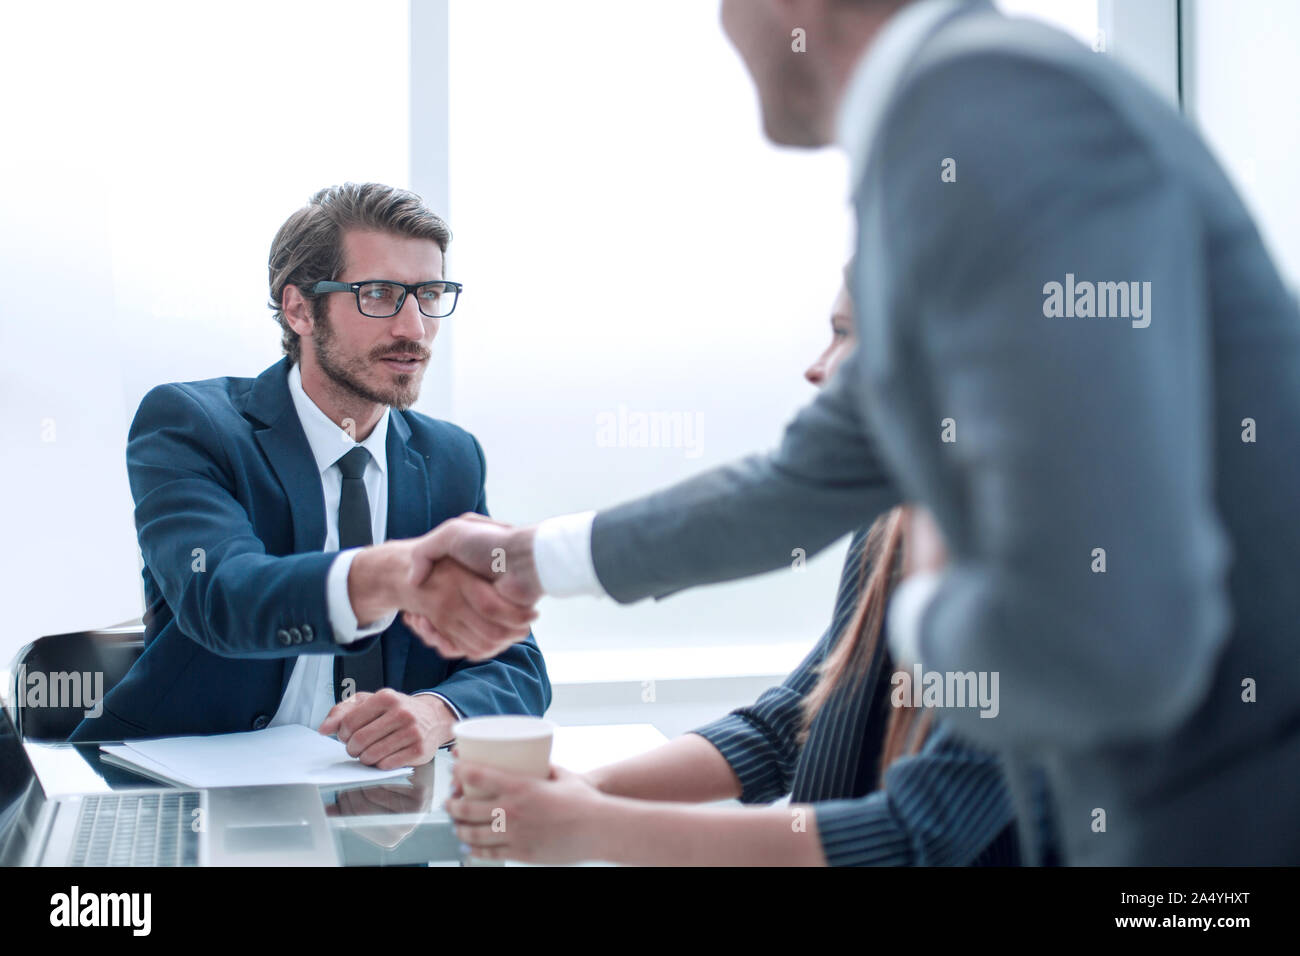 business colleagues shaking hands at a business meeting. Stock Photo